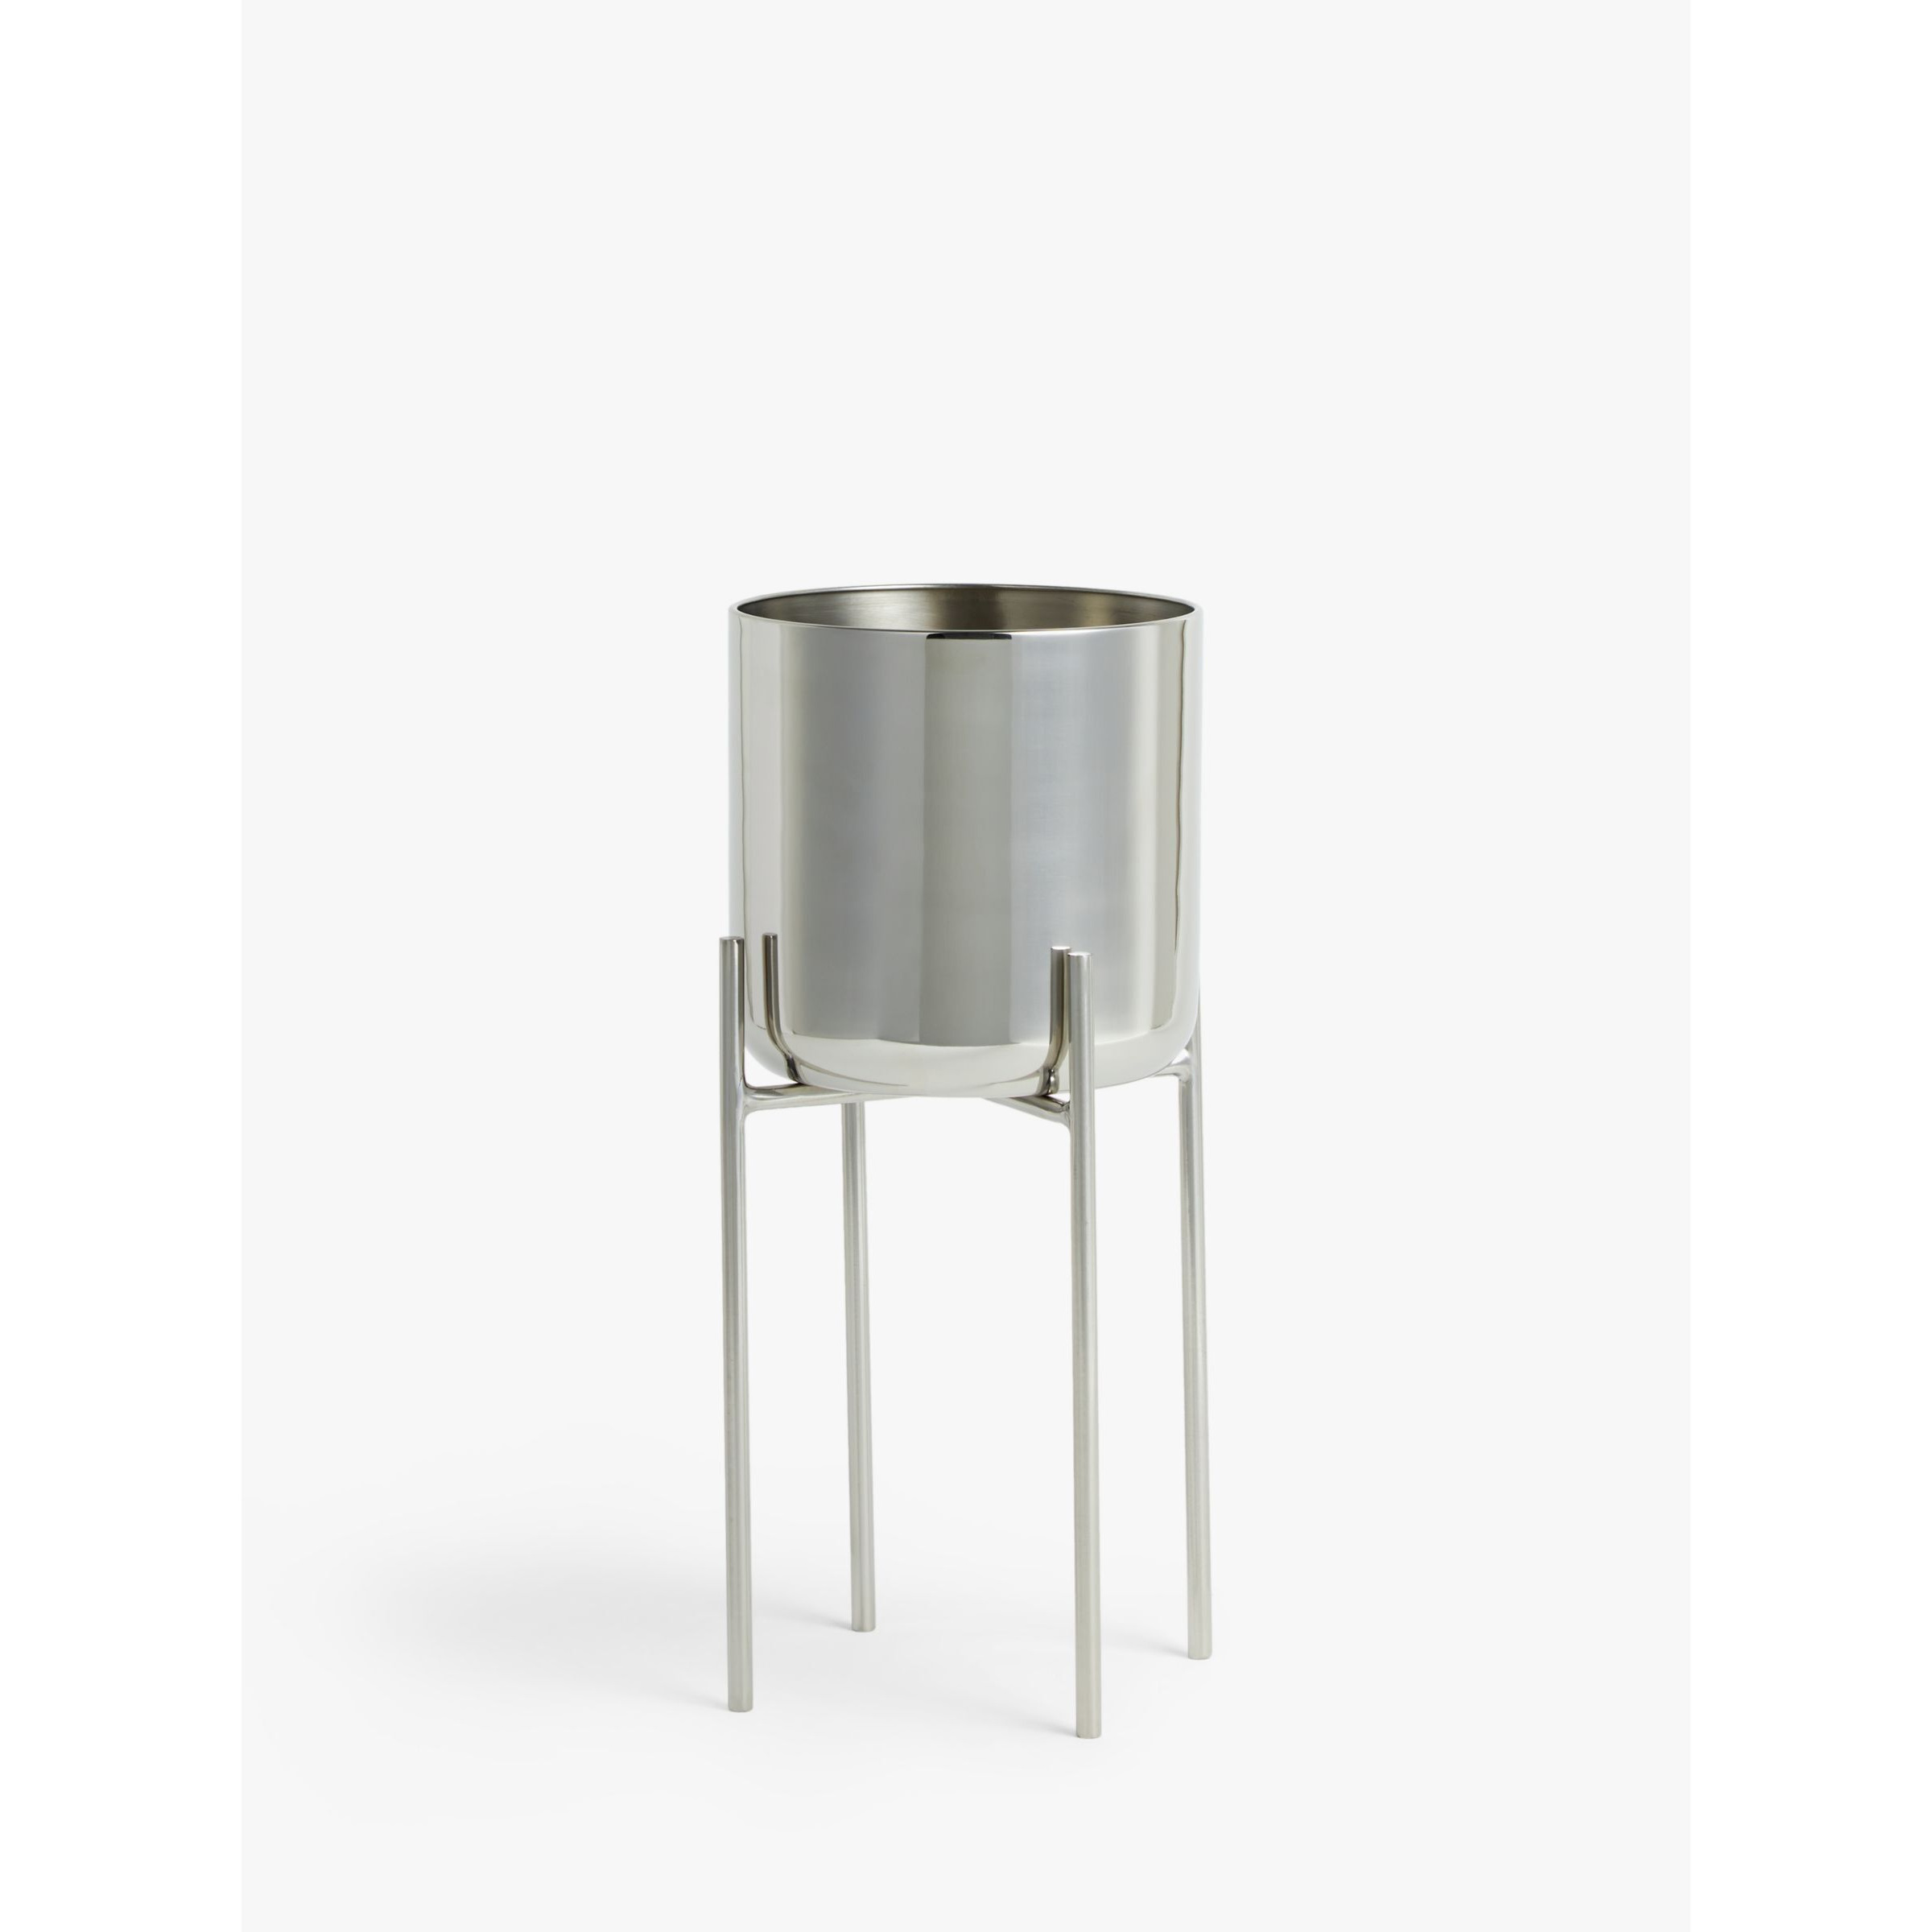 John Lewis Indoor Stainless Steel  Planter & Stand, Silver - image 1